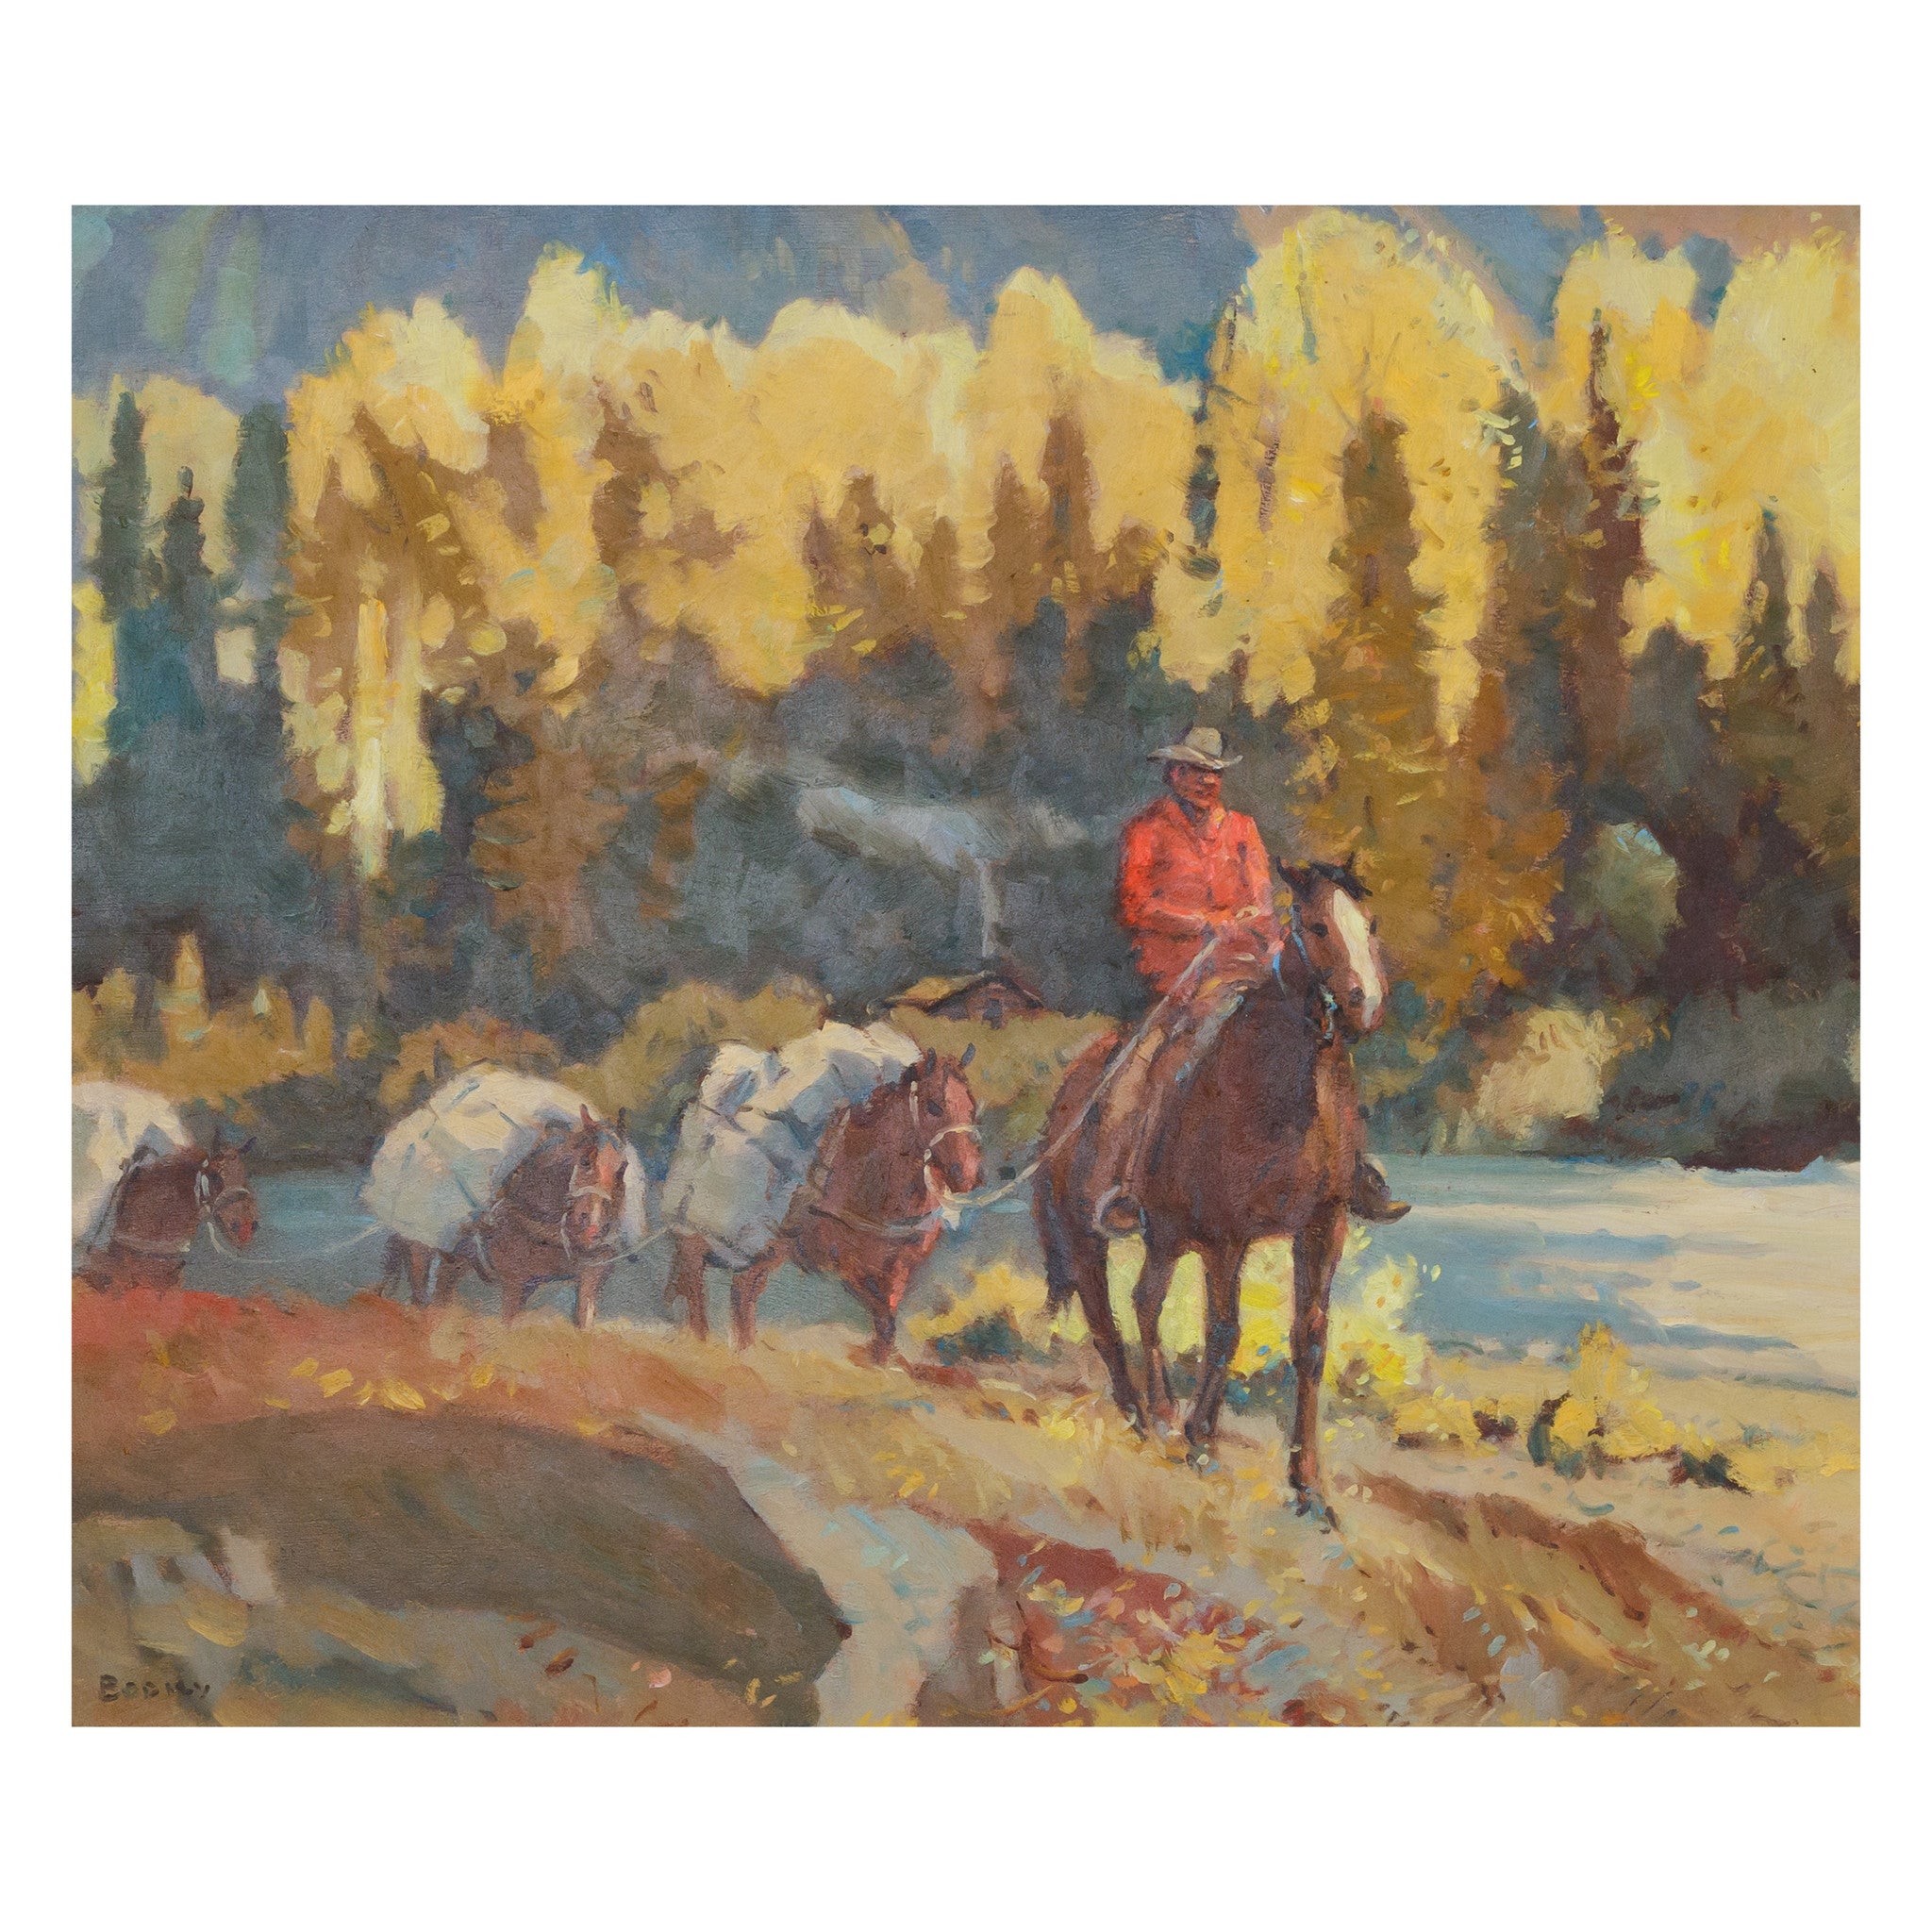 Pack Train on the River by Sheryl Bodily, Fine Art, Painting, Western